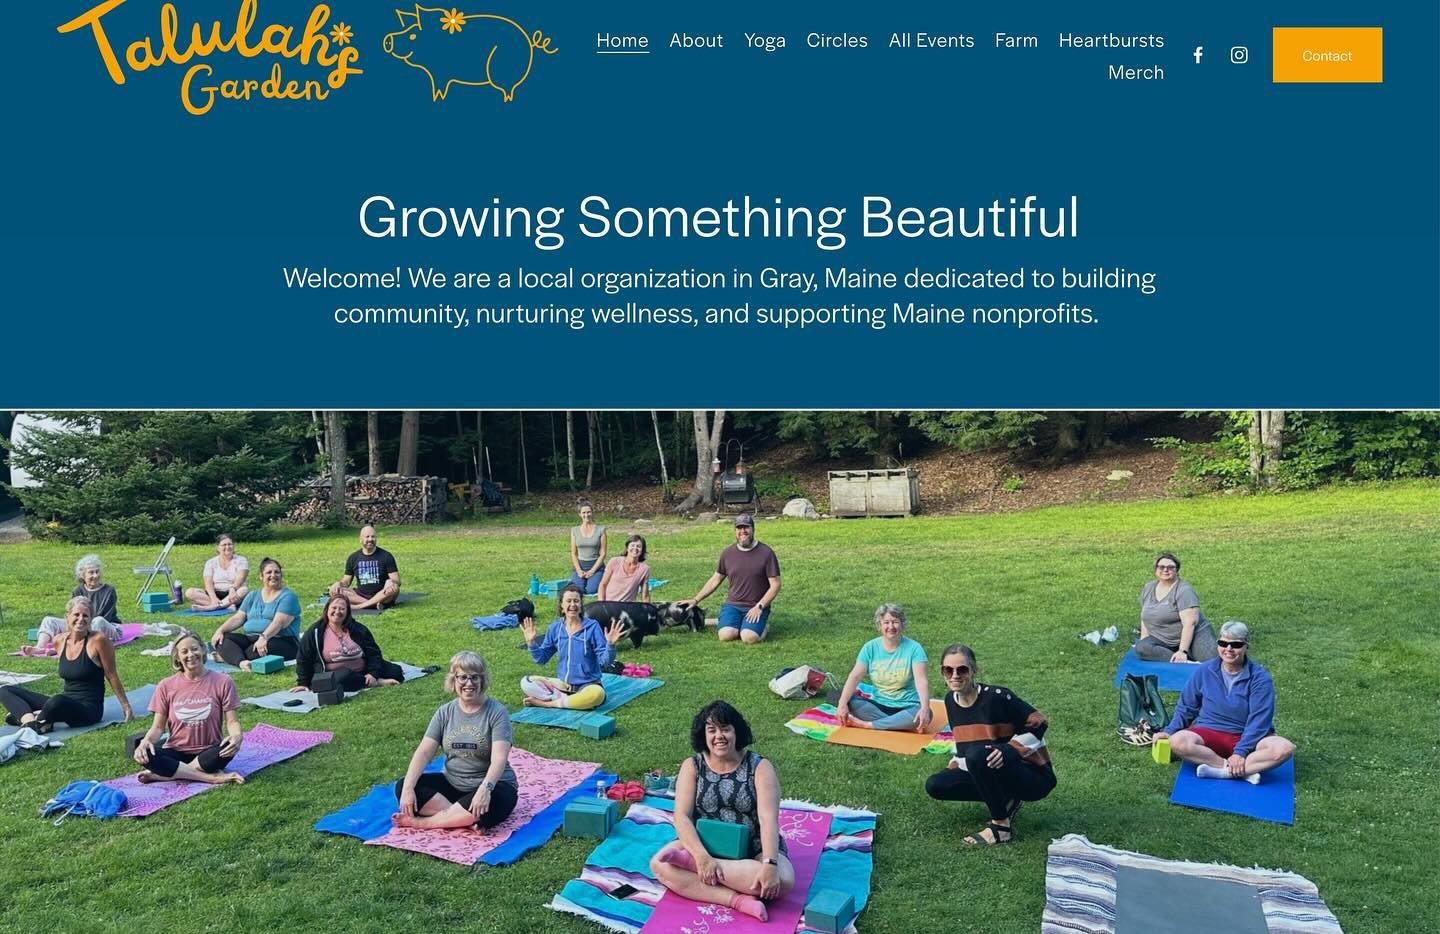 I&rsquo;m so excited to welcome you to Talulah&rsquo;s Garden!  Be sure to check out the schedule for the summer. There is so much happening &amp; more being added, so keep checking back. This journey is just beginning &amp; I can&rsquo;t wait to see